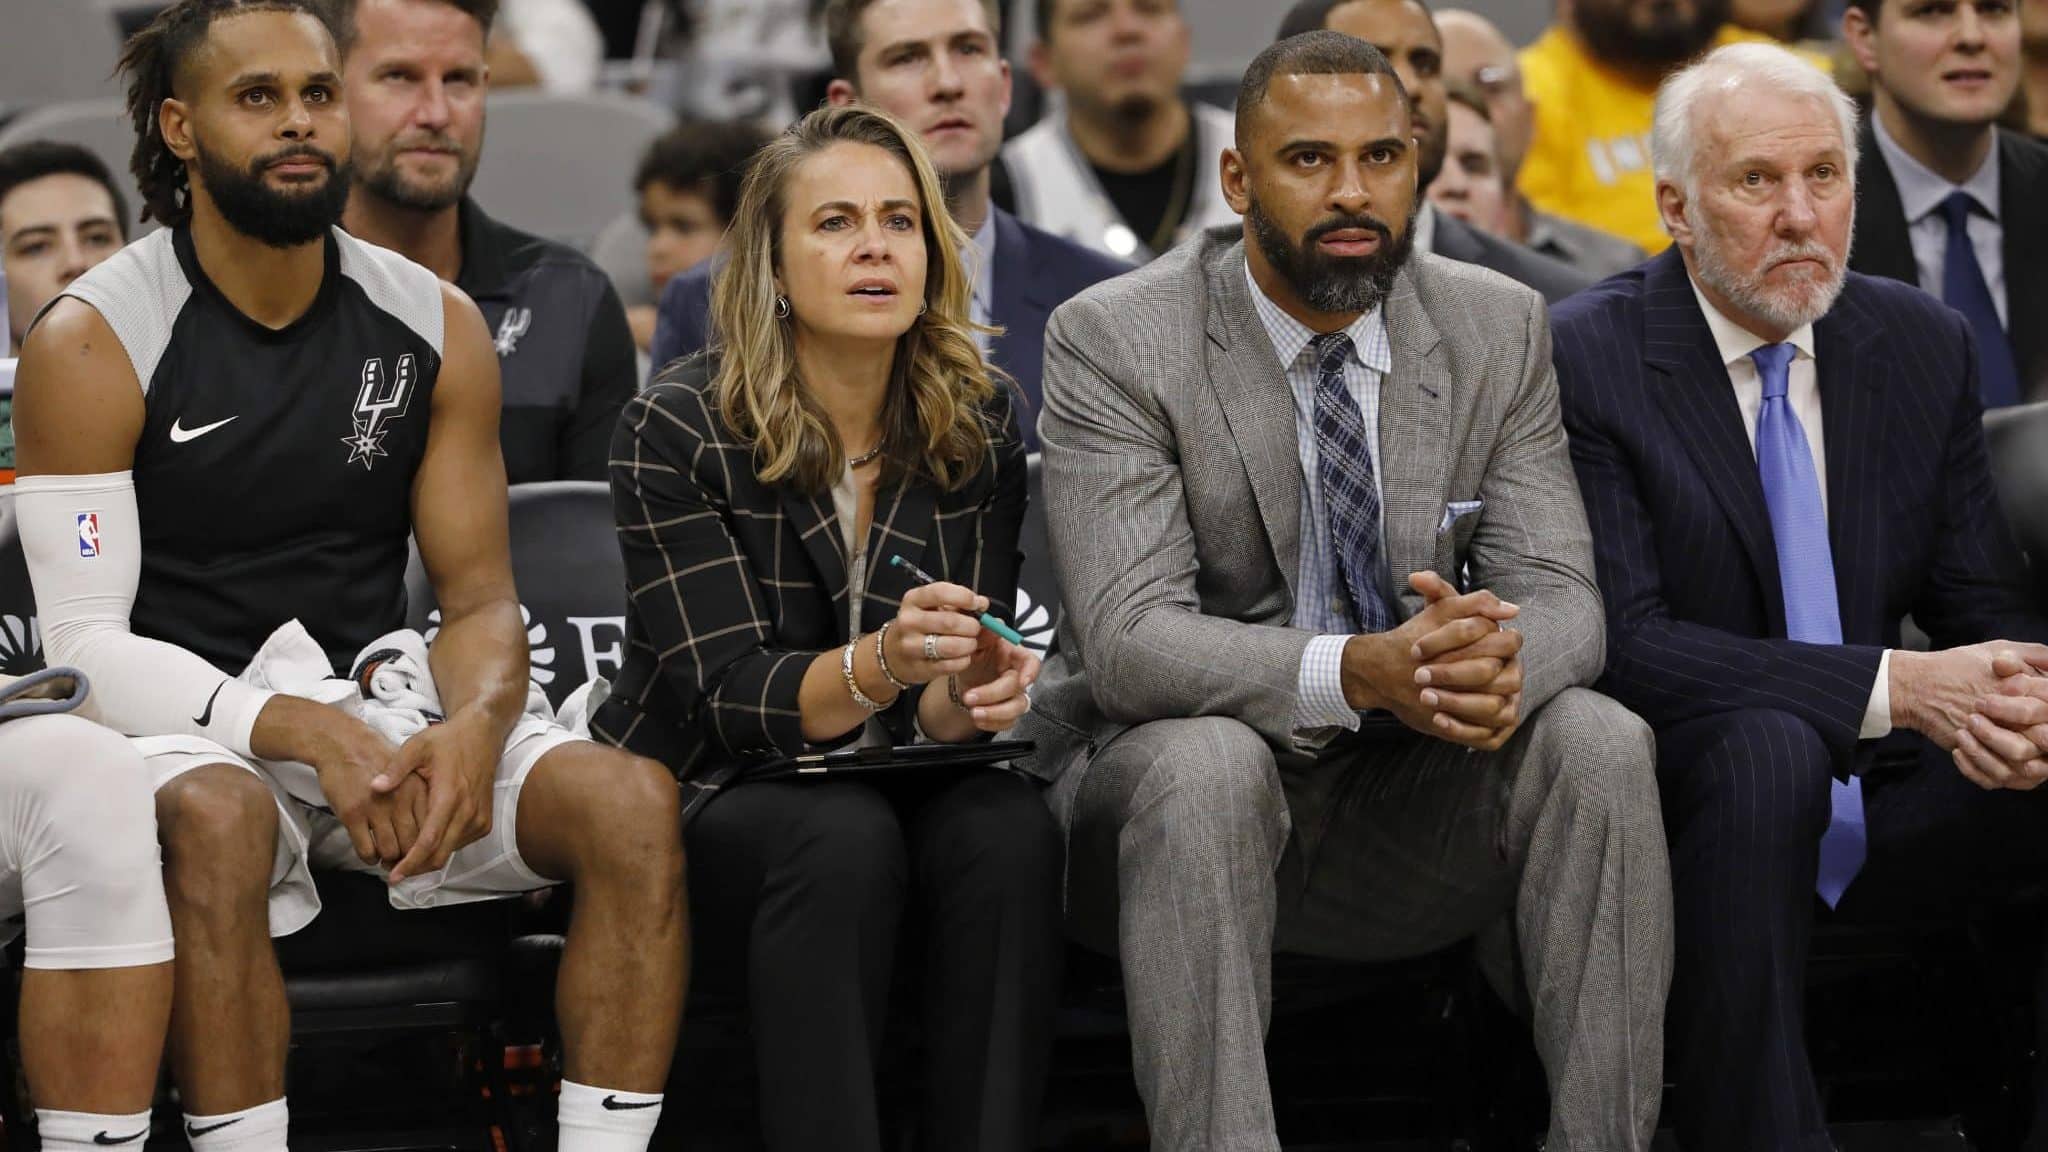 SAN ANTONIO, TX - OCTOBER 24: Patty Mills #8 of the San Antonio Spurs, assistant coaches Becky Hammon, Ime Udoka, and head coach Gregg Popovich watch action against the Indiana Pacers from the bench during an NBA game on October 24, 2018 at the AT&T Center in San Antonio, Texas. The Indiana Pacers won 116-96. NOTE TO USER: User expressly acknowledges and agrees that, by downloading and or using this photograph, User is consenting to the terms and conditions of the Getty Images License Agreement.